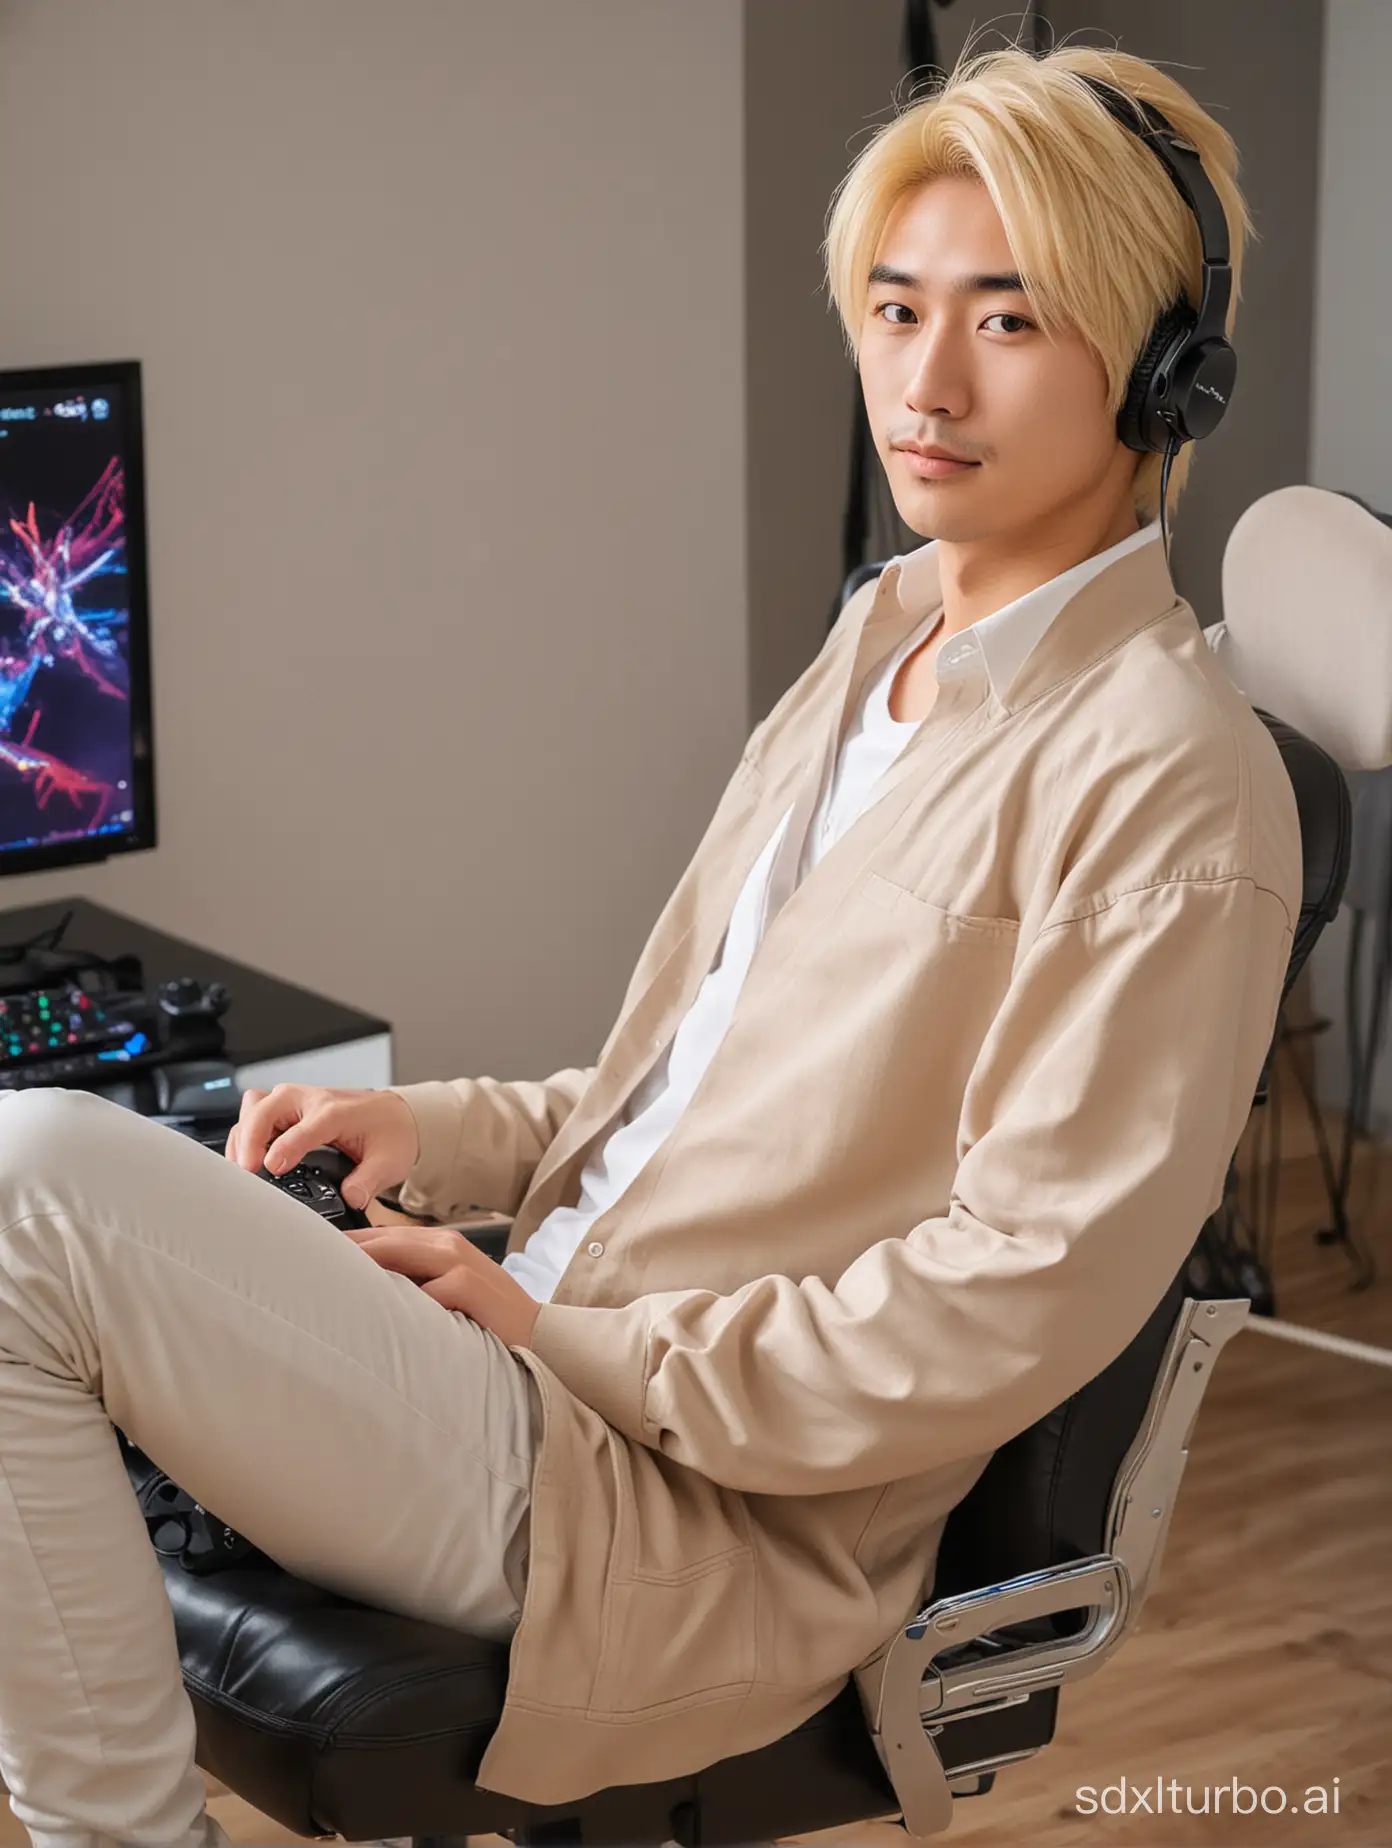 japanese man, blonde, sitting in the gaming chair